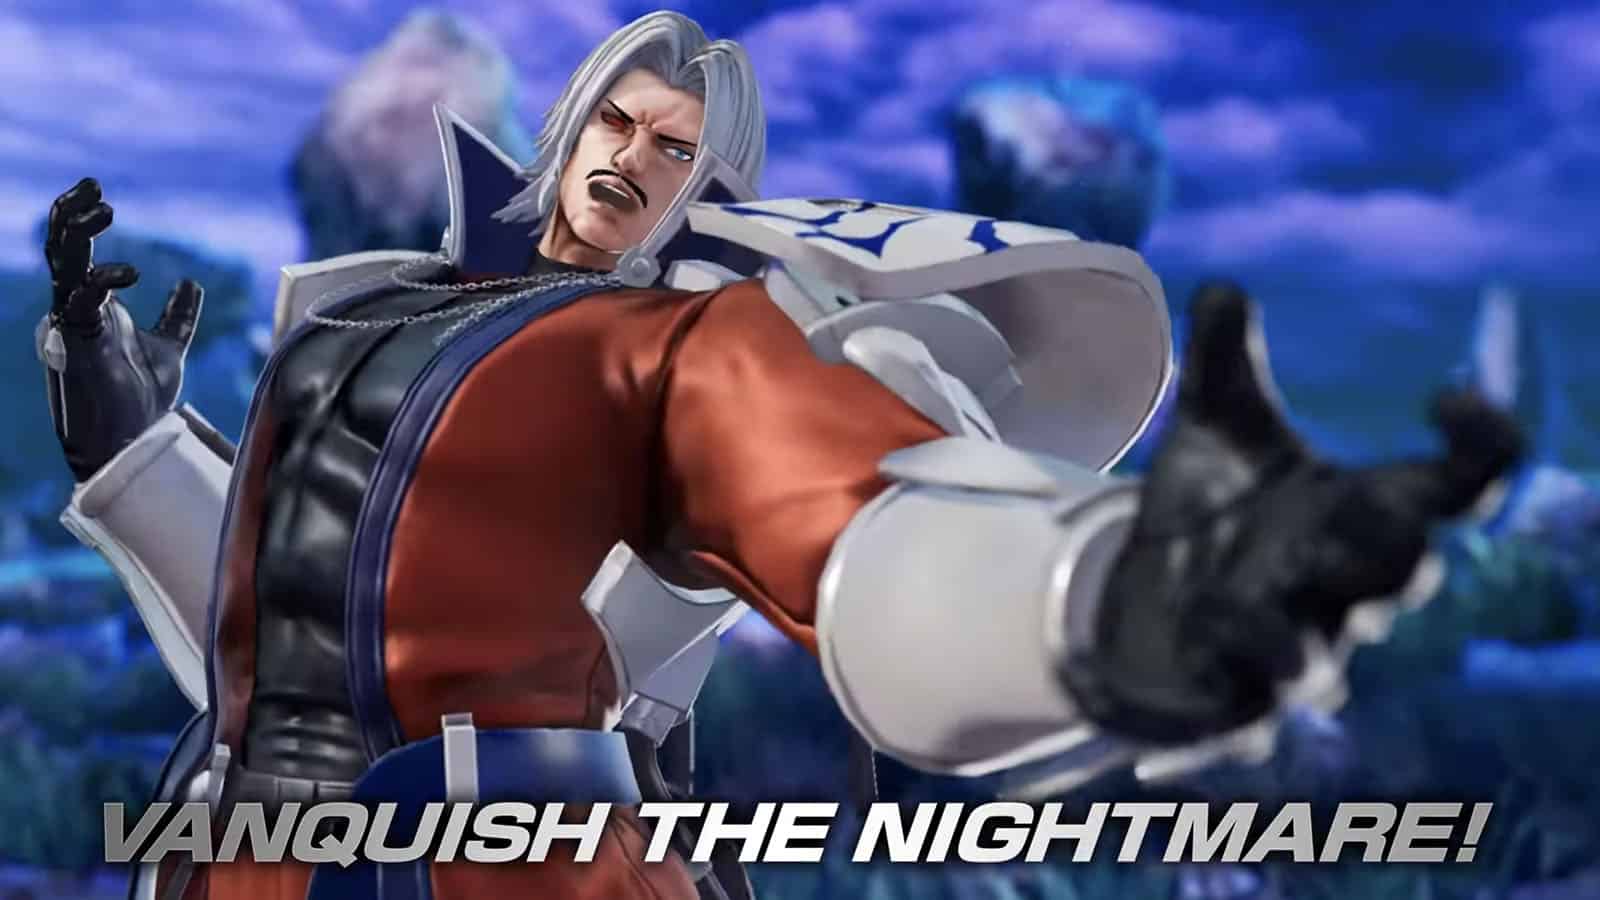 Omega Rugal in King of Fighters 15